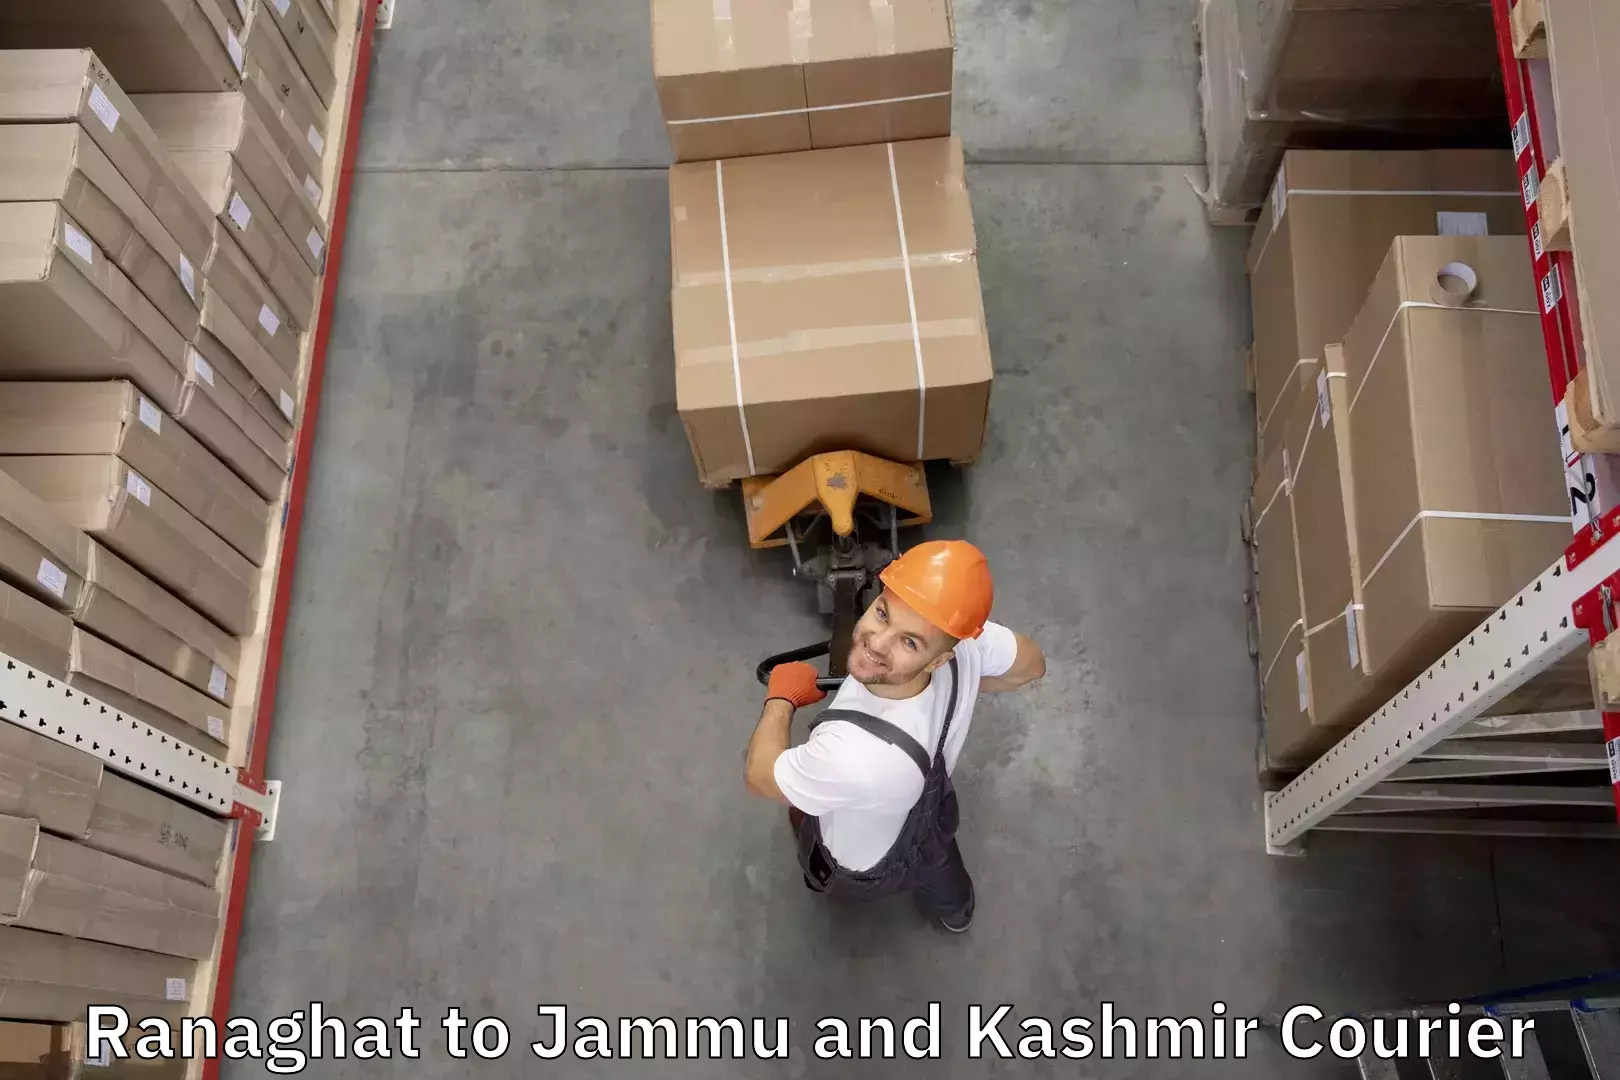 Luggage transfer service Ranaghat to Jammu and Kashmir